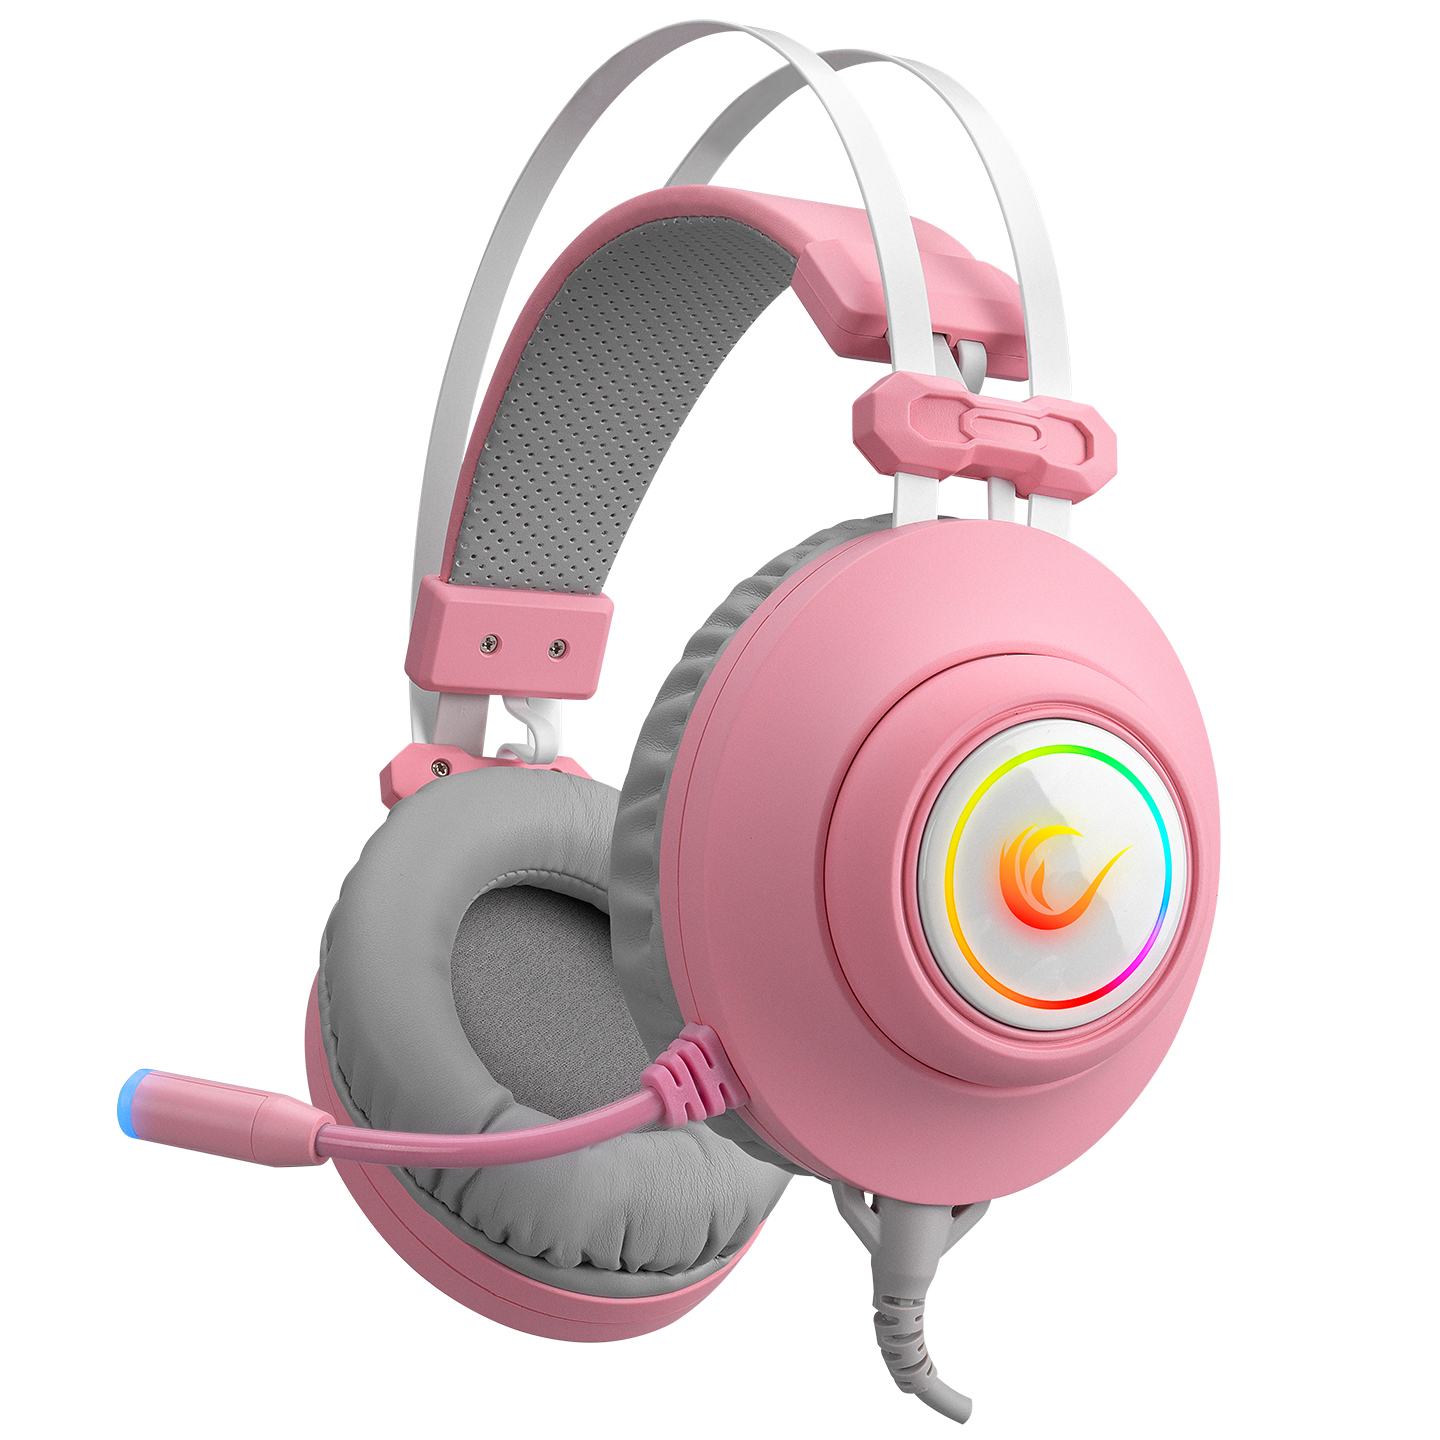 Rampage RM-K1 PULSAR PINK Usb 7.1 Surround+Vibration RGB Light Effect Gaming Headset with long flexible Microphone